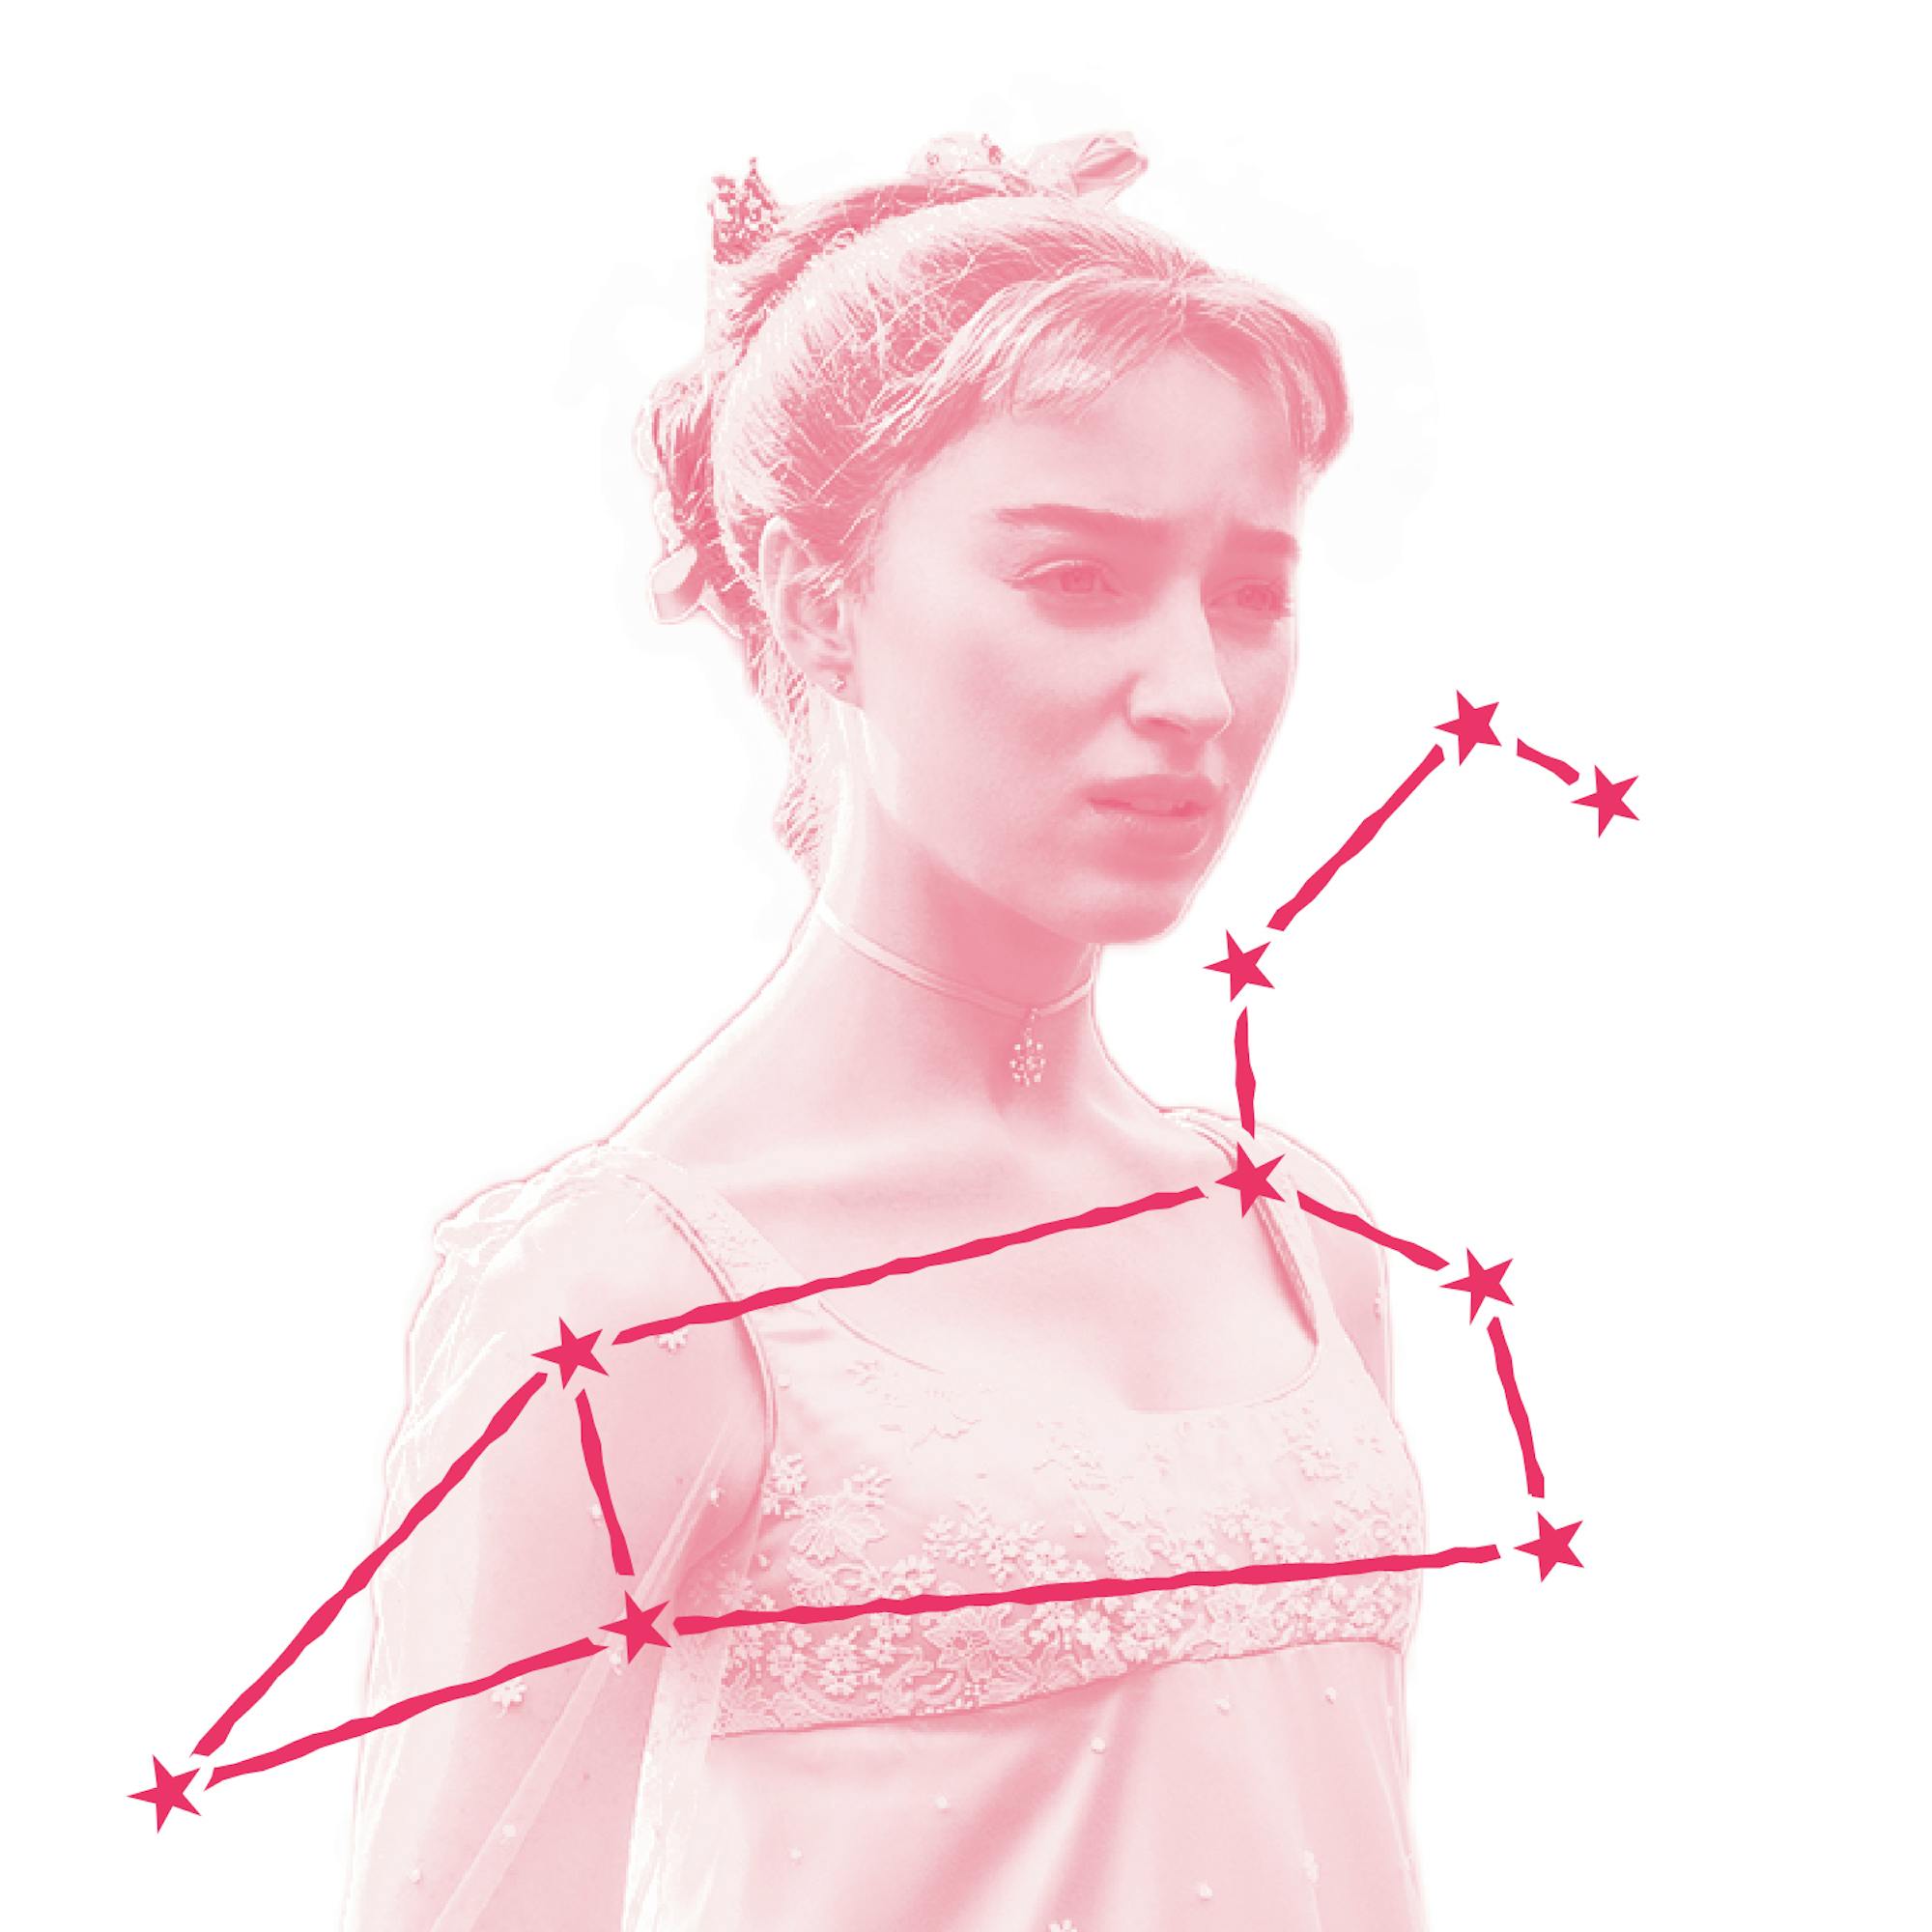 Daphne Bridgerton (played by Phoebe Dynevor) wears the expression of the love-lorn and righteous in this still from Bridgerton. Who in the world do you think she’s brooding over? Over the image is an illustration of Daphne’s zodiac constellation.